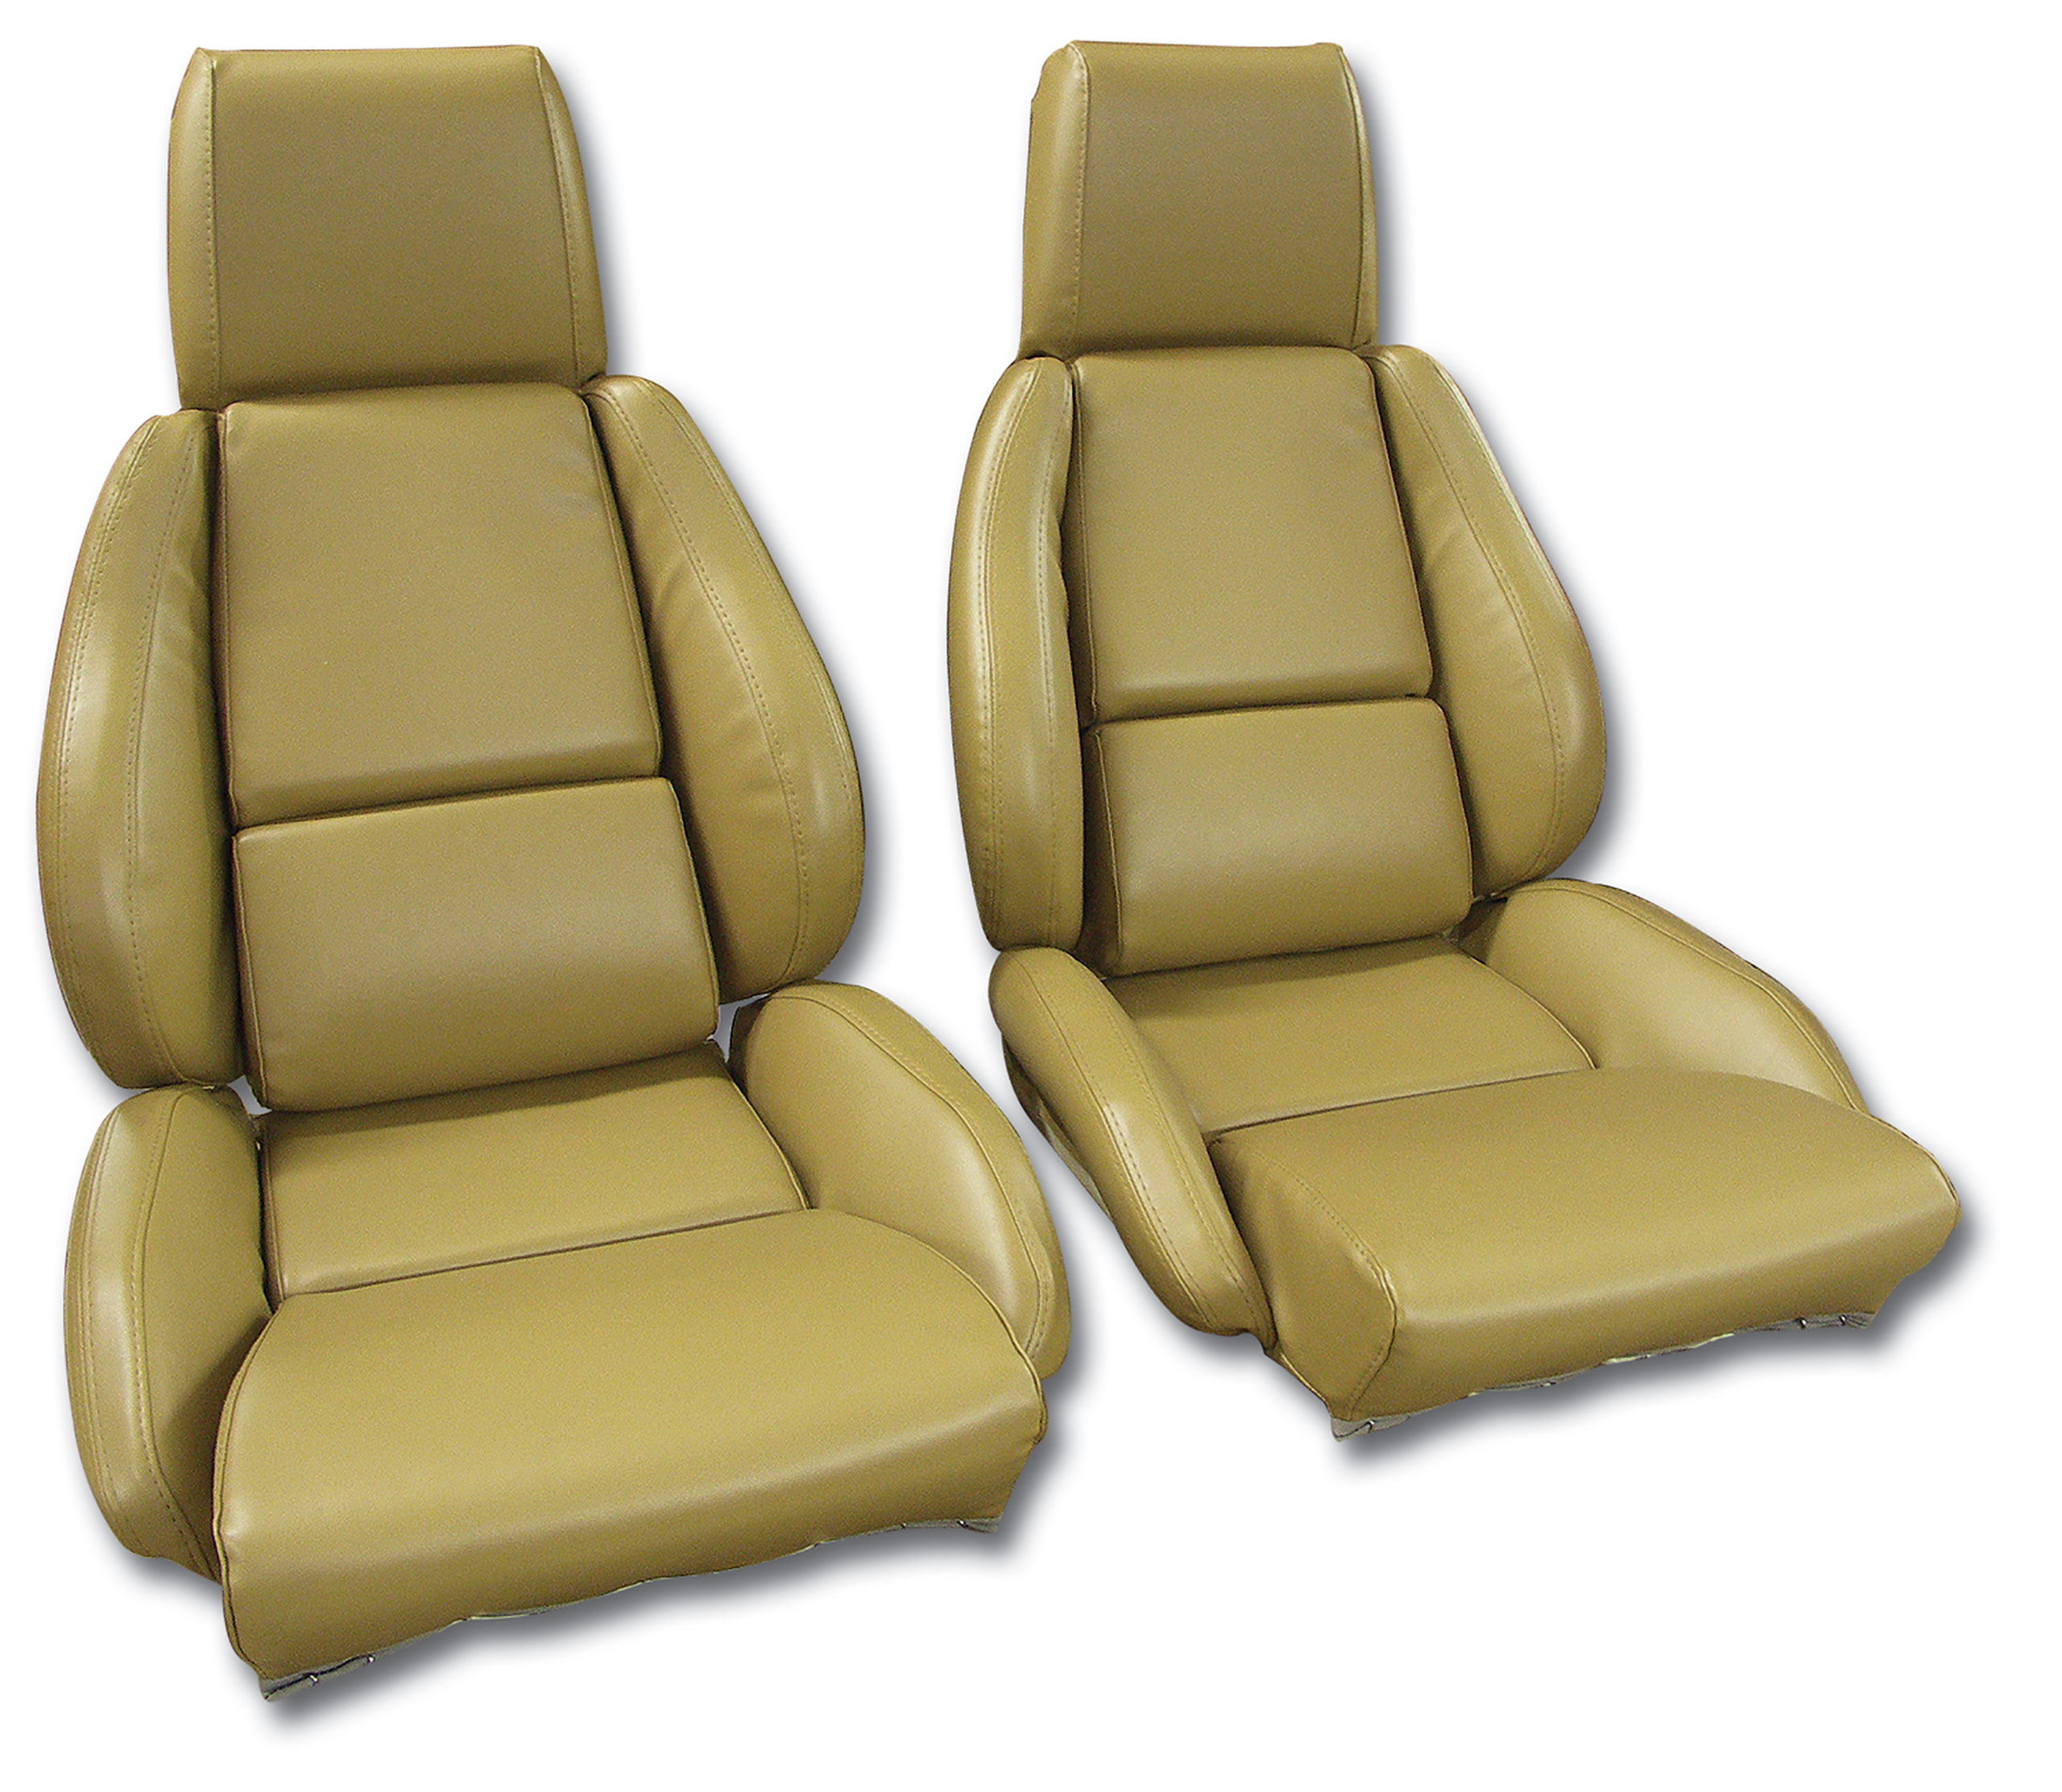 84-87 Corvette C4 468871 Mounted Leather-Like Vinyl Seat Covers Bronze Standard No-Perforations CA-468872 